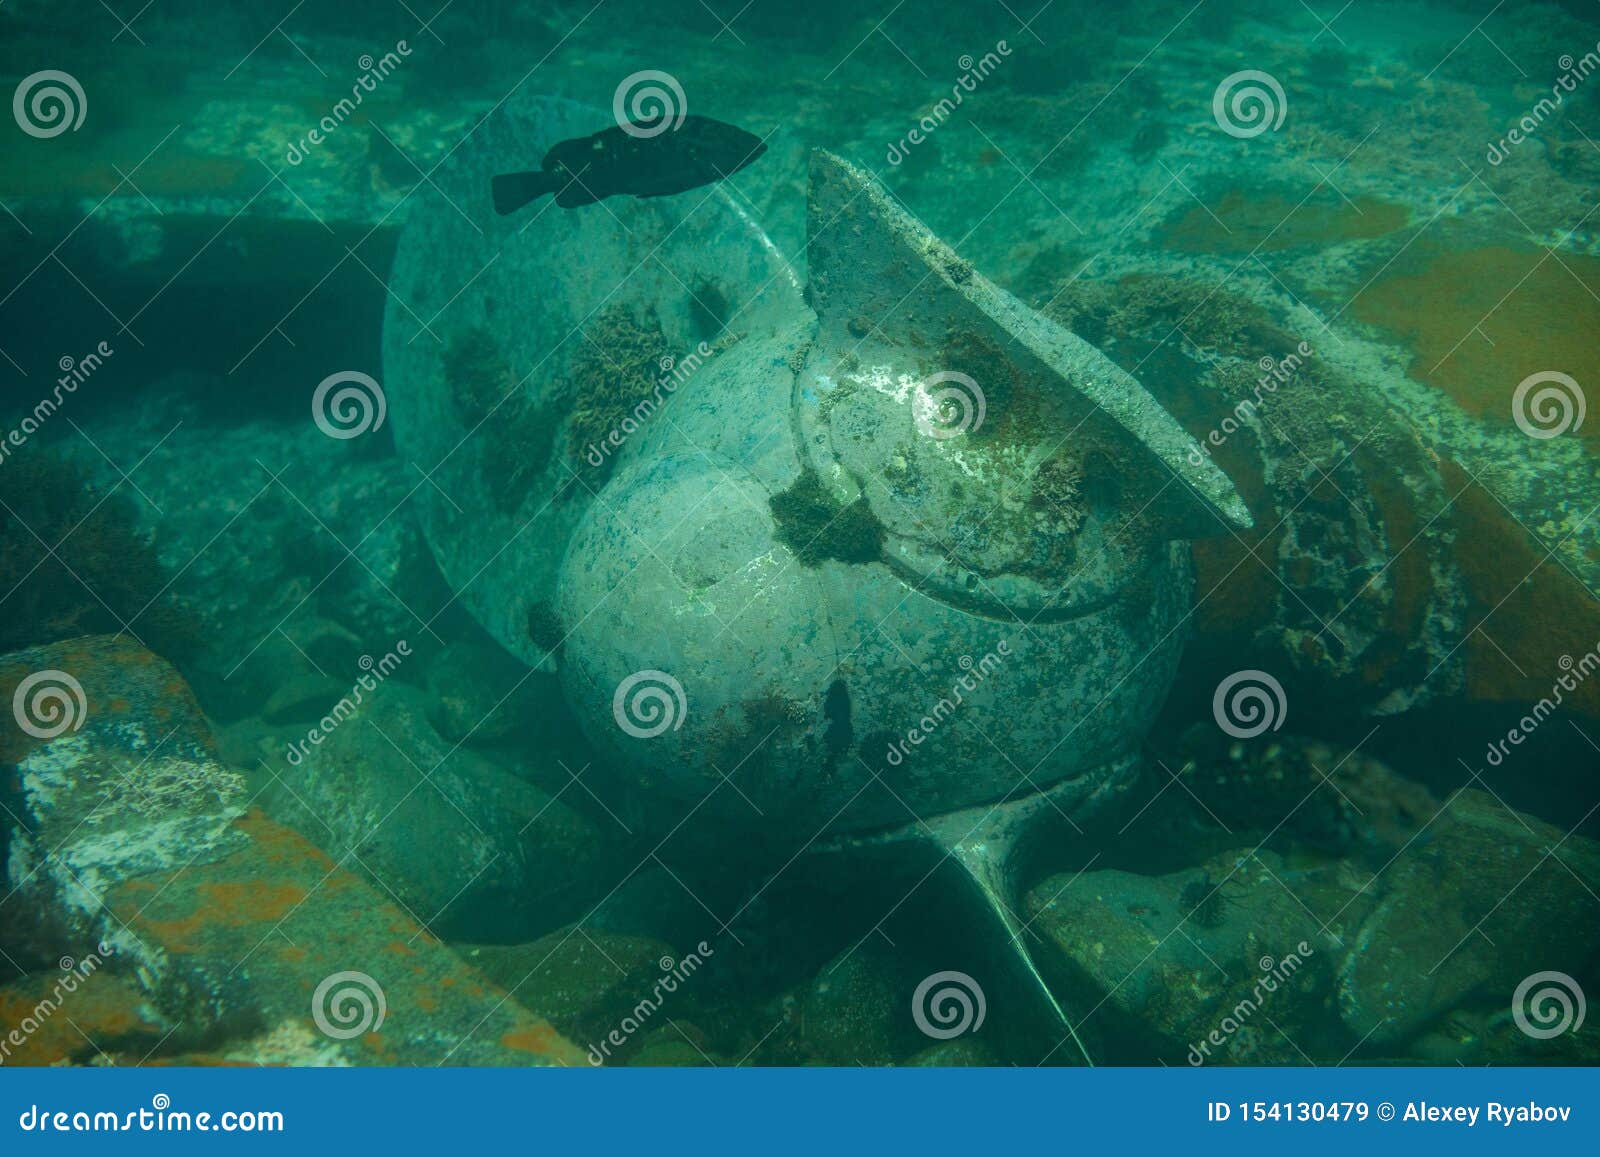 Diving and underwater photography, the ship underwater sunken lies on the ocean floor. The sunken ship lies on the ocean floor, the vessel propeller is protected by fish and sea urchins